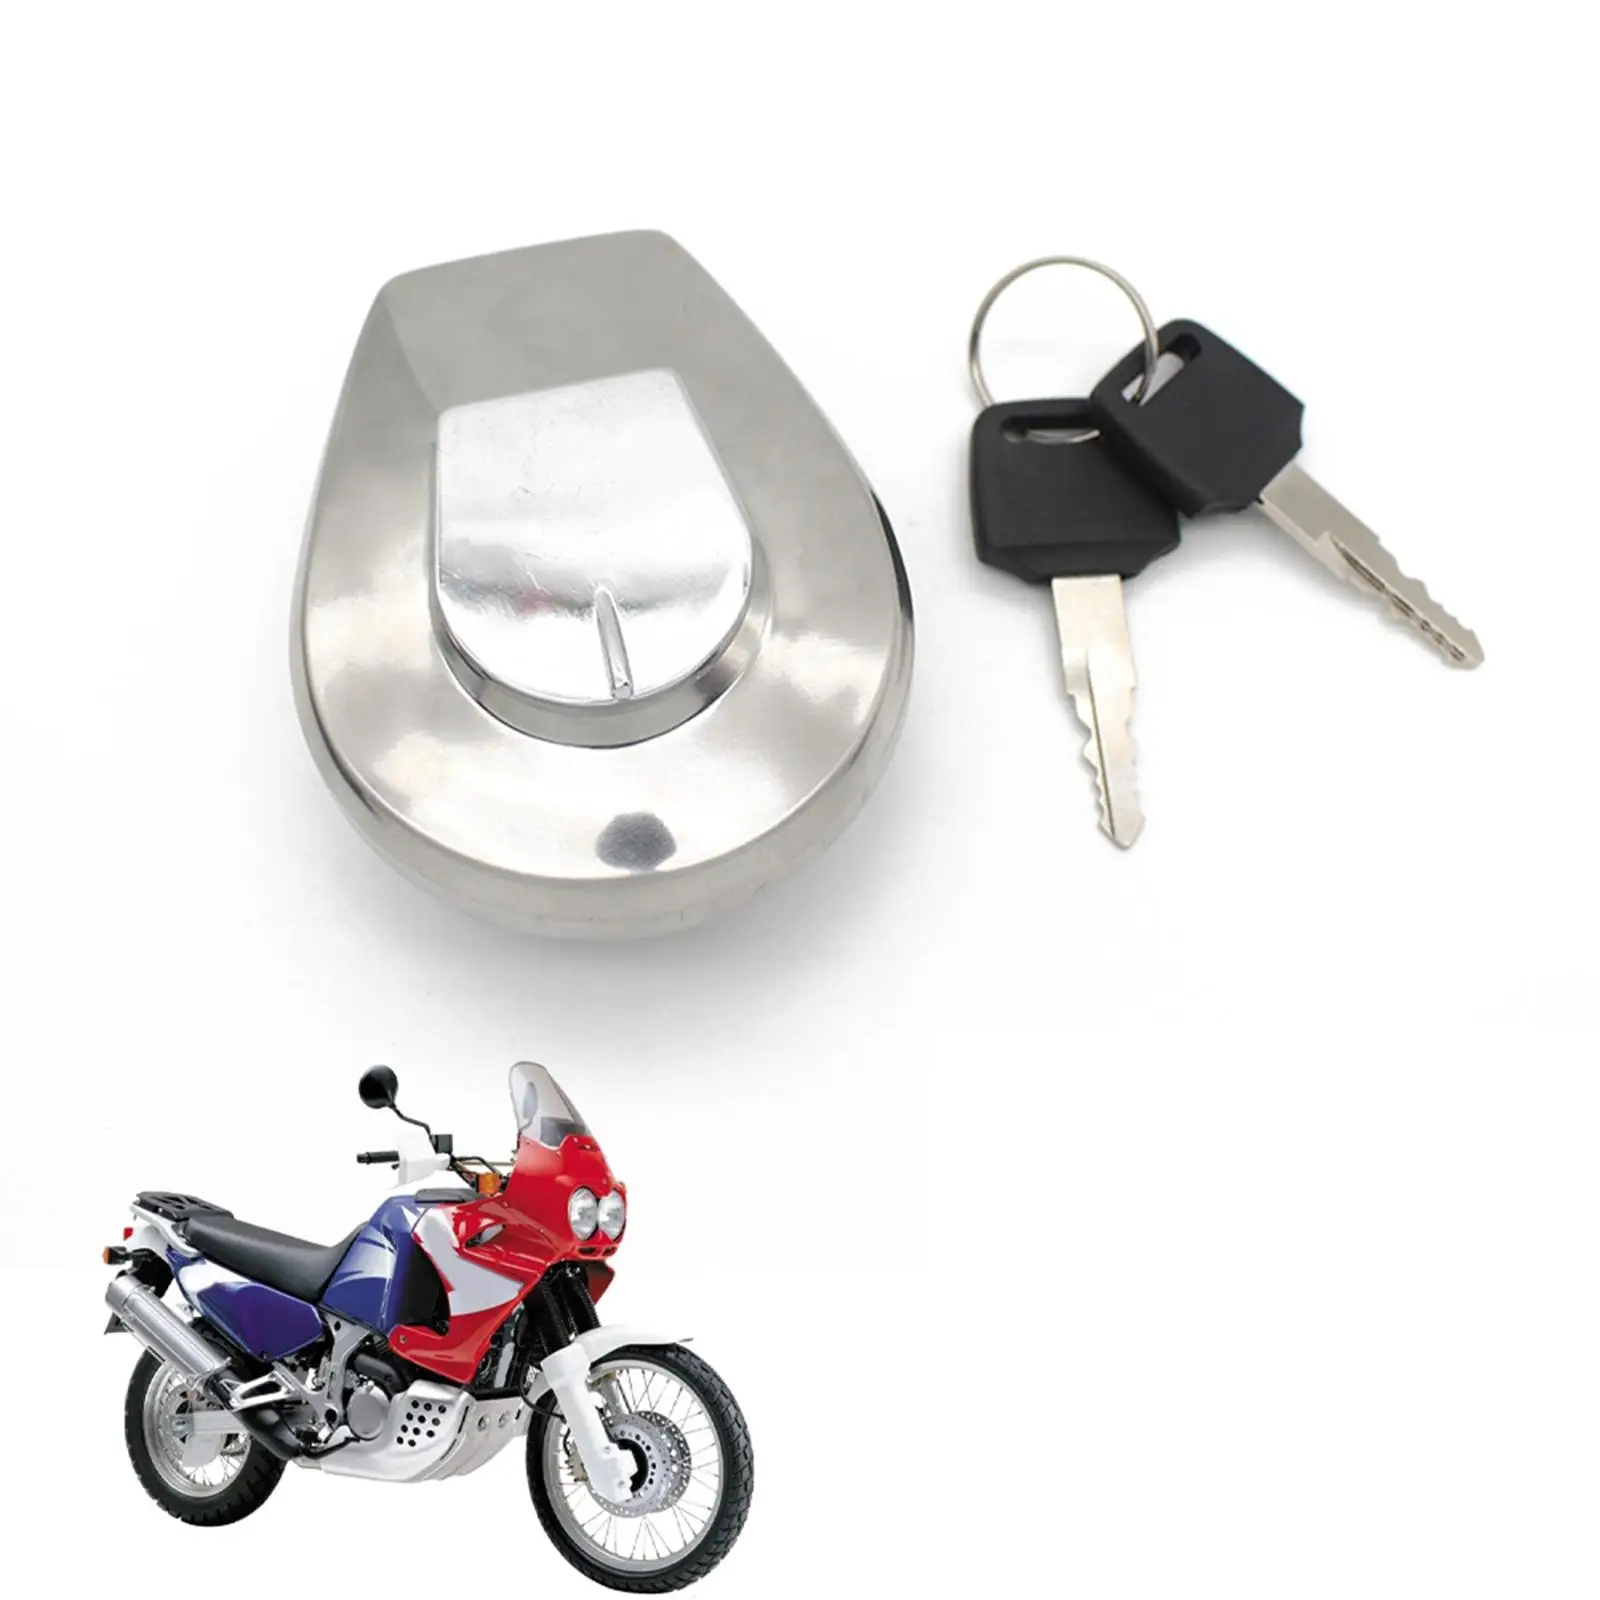 Motorbike Oil Fuel Tank Gas Cap Cover with 2 Keys for  Vf750C GL1500ct VT1100C3 Vf500C Vf1100C